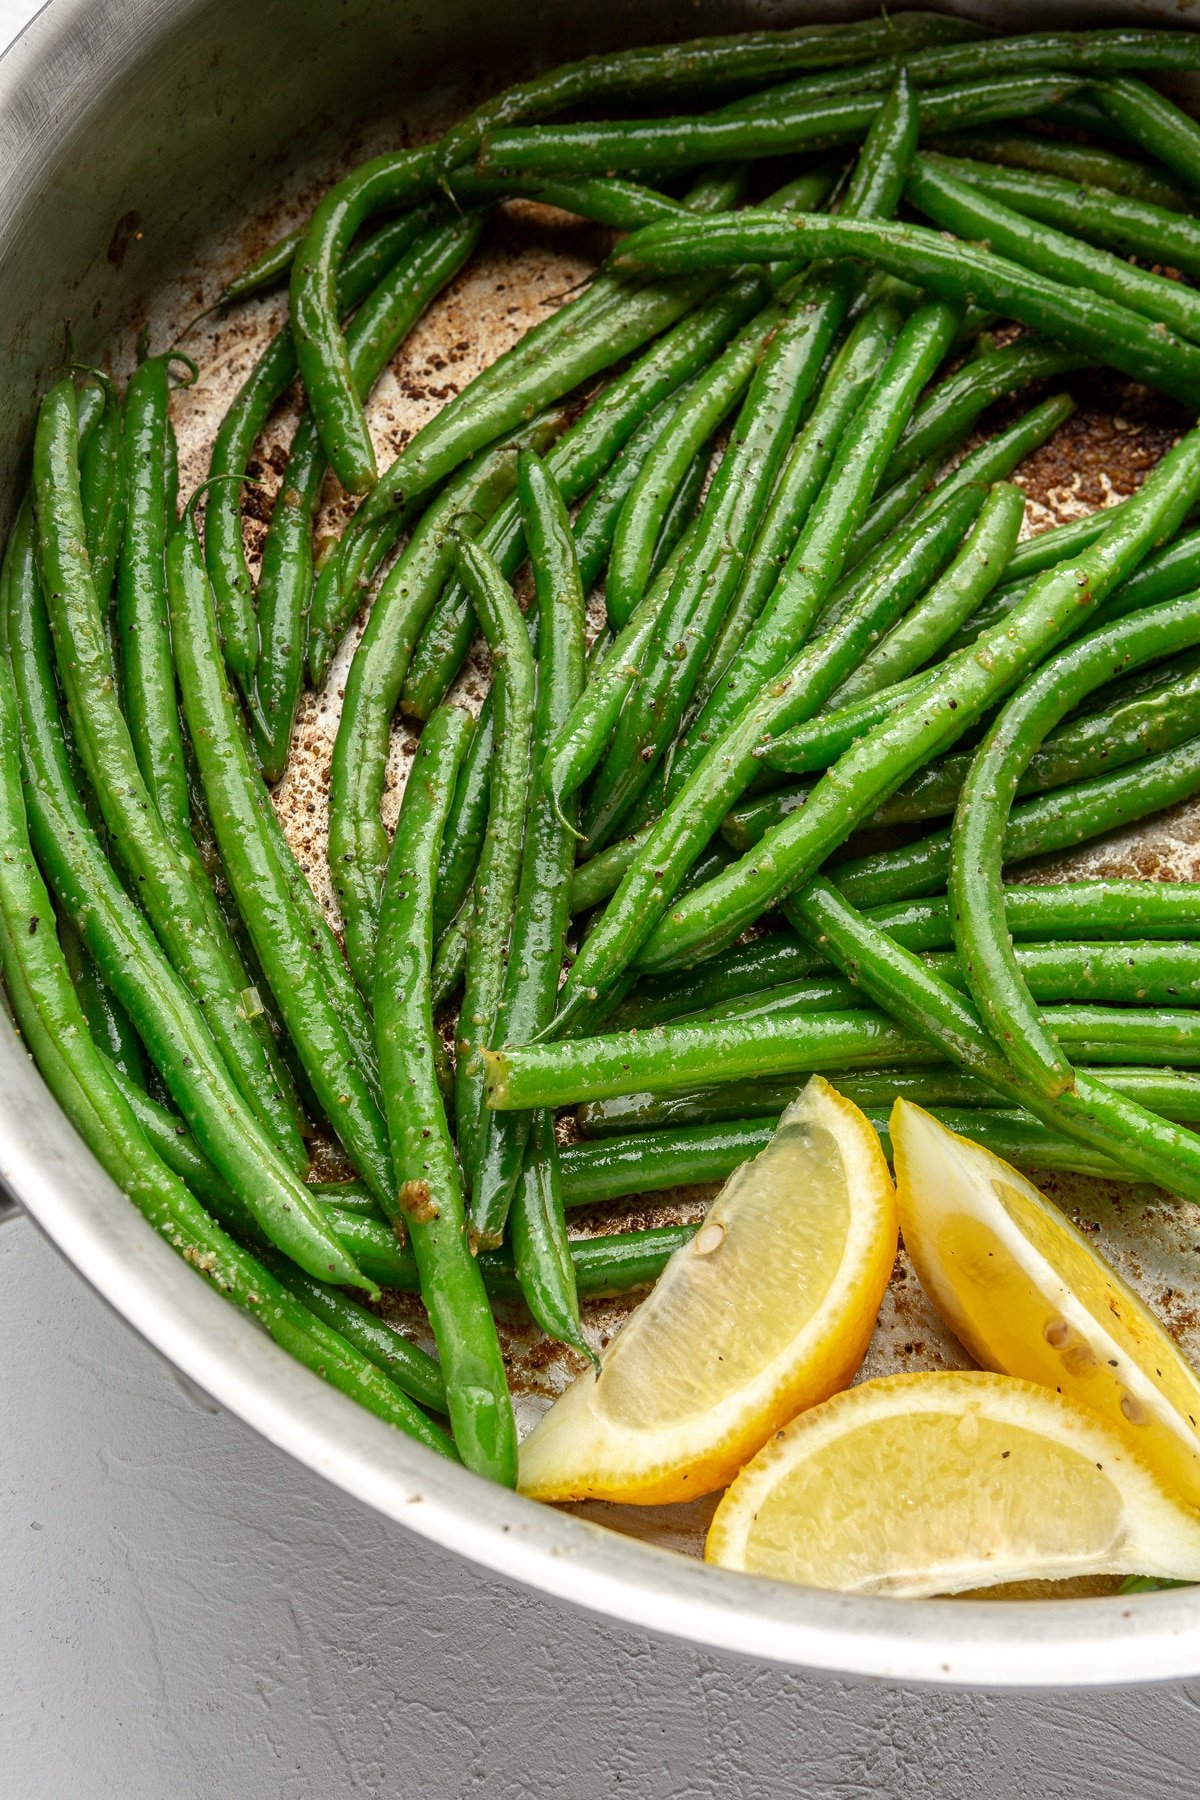 Green beans have been sautéed until soft and slightly browned. Three slices of lemon have been added to the pan.